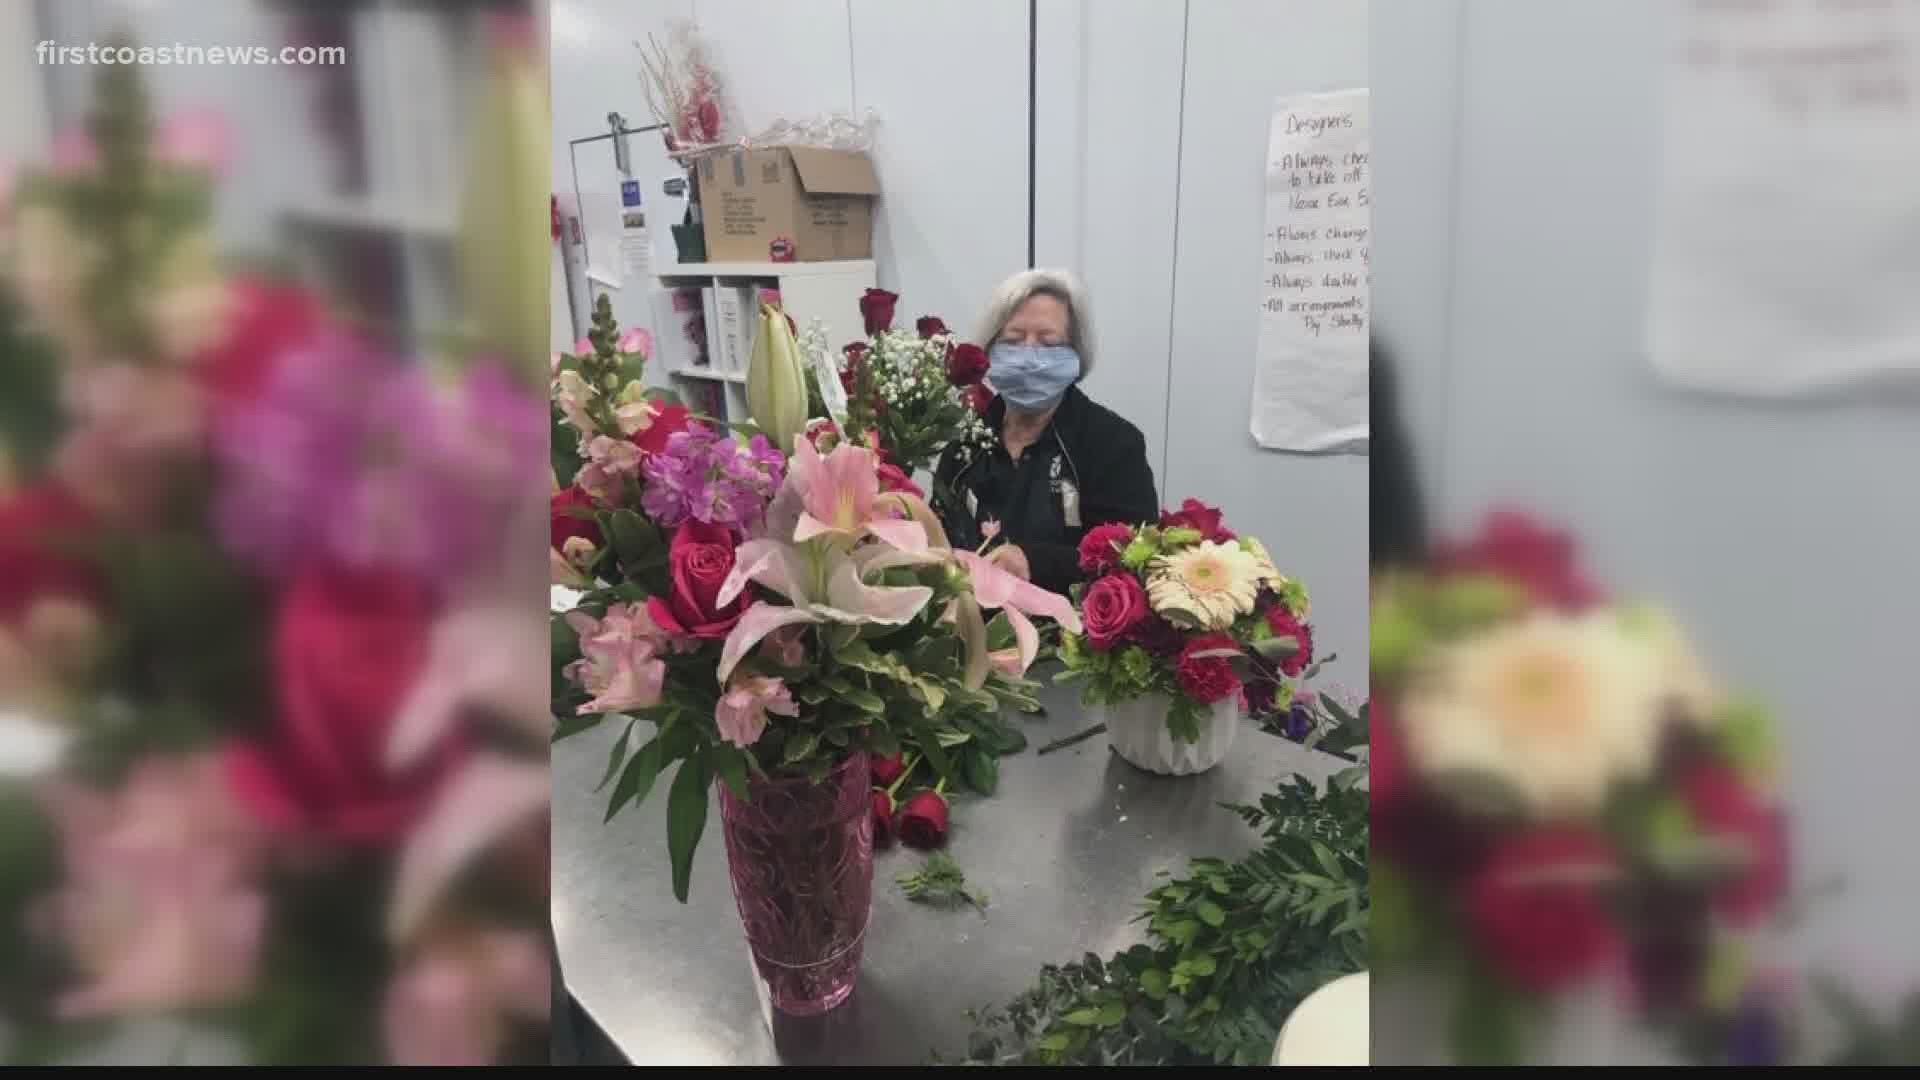 Business at the Jacksonville Flower Market isn’t just booming, owner Shelly Hagan says it’s blossoming into a record week of sales.